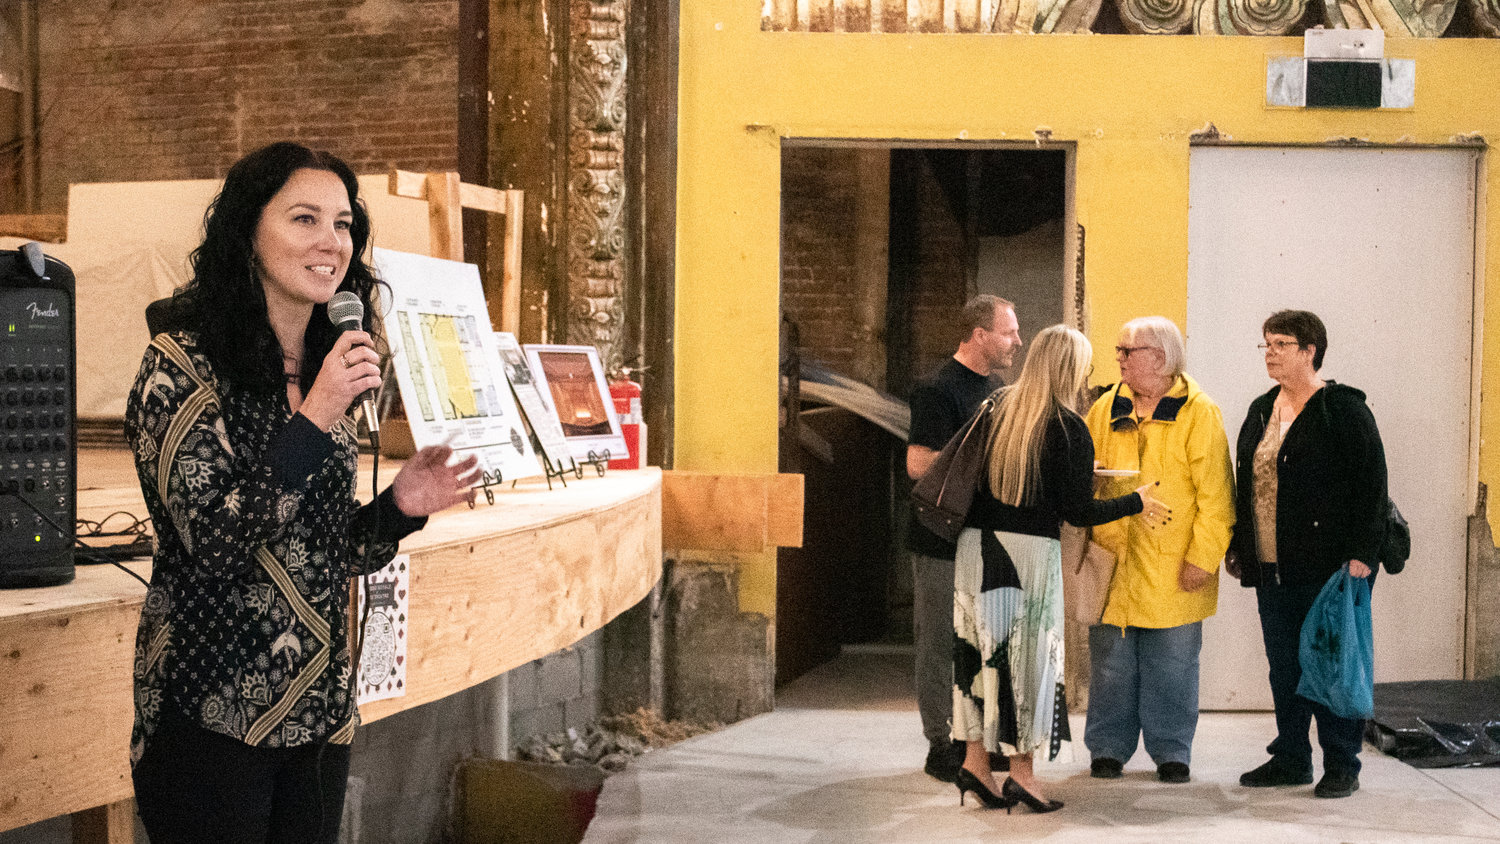 Naomi Snell introduces speakers and upcoming events during a Centralia-Chehalis Chamber of Commerce Business After Hours event and open house at the Fox Theater Thursday in Centralia.